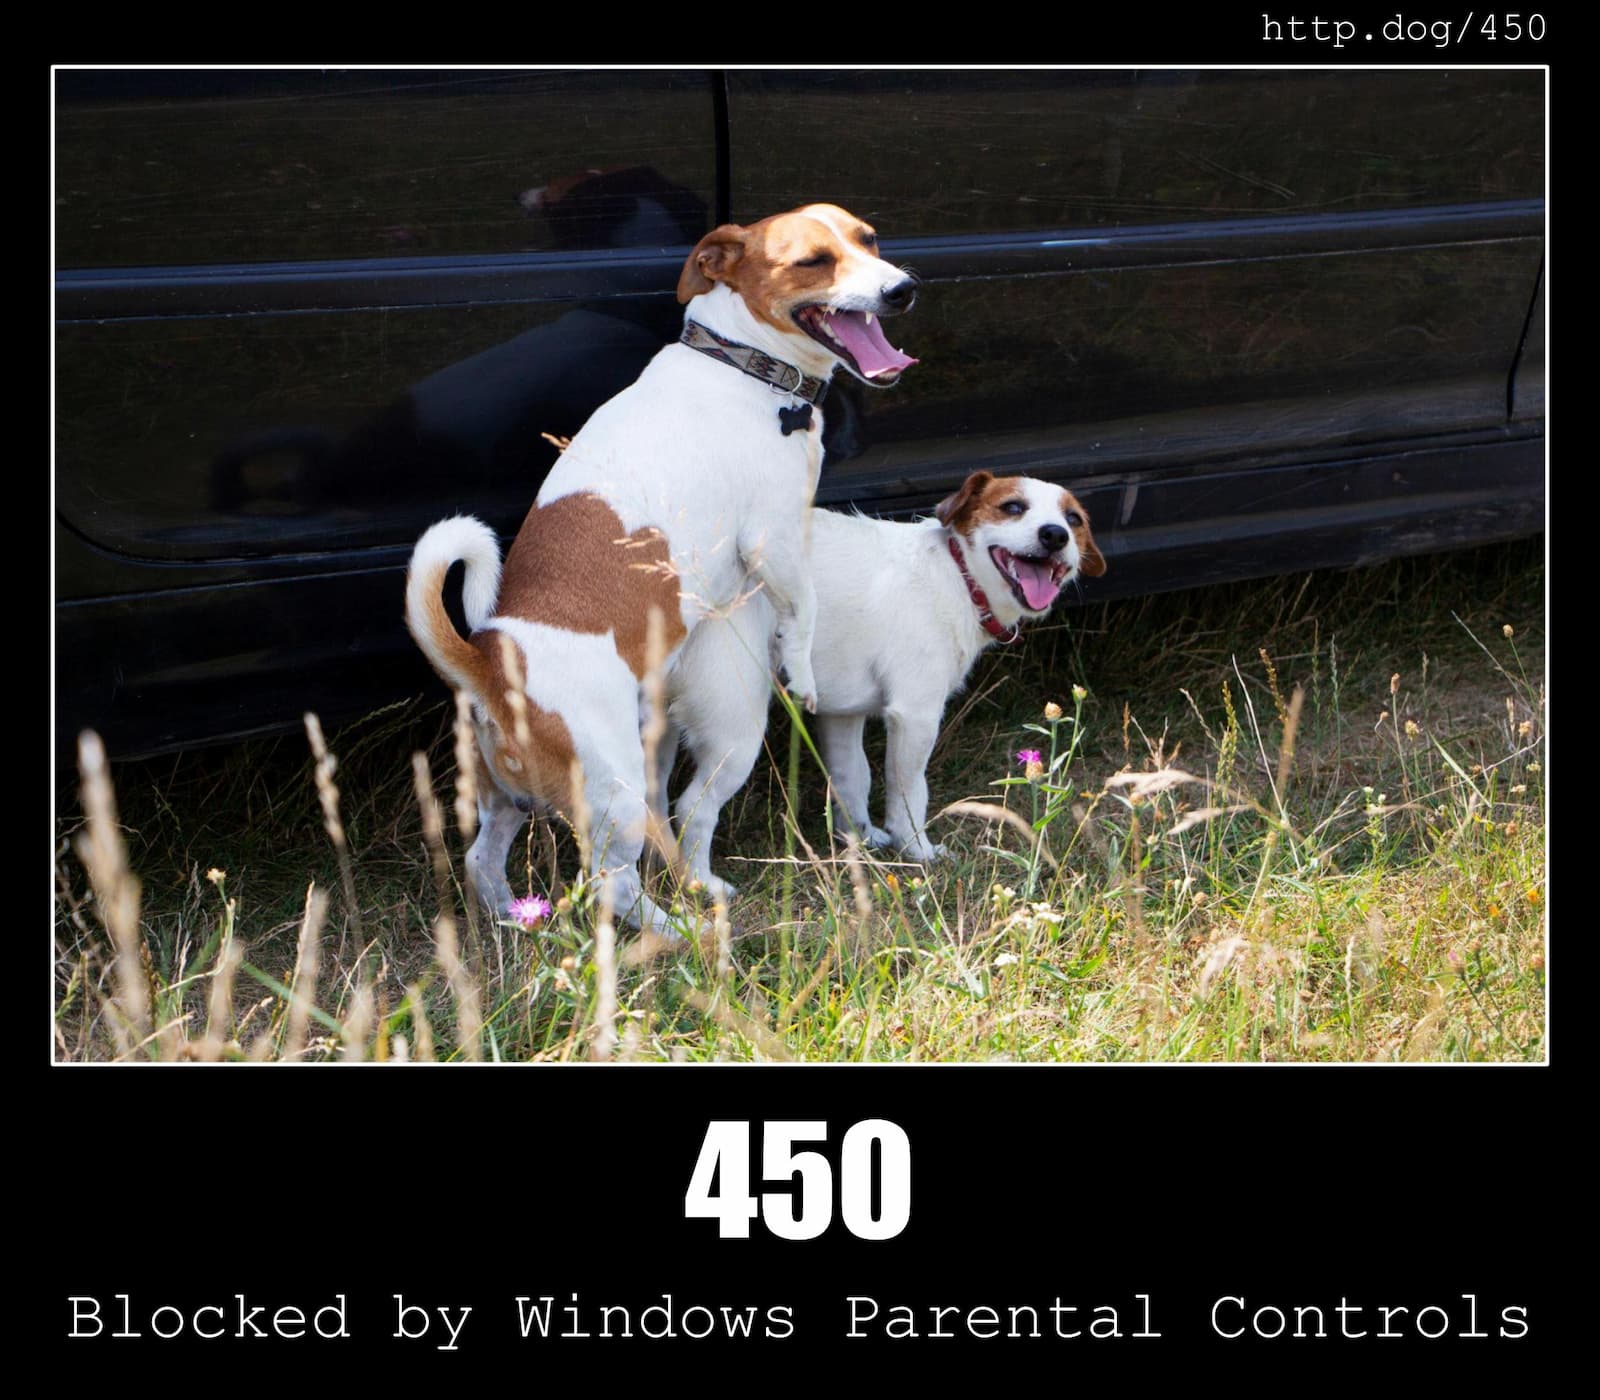 HTTP Status Code 450 Blocked by Windows Parental Controls & Dogs